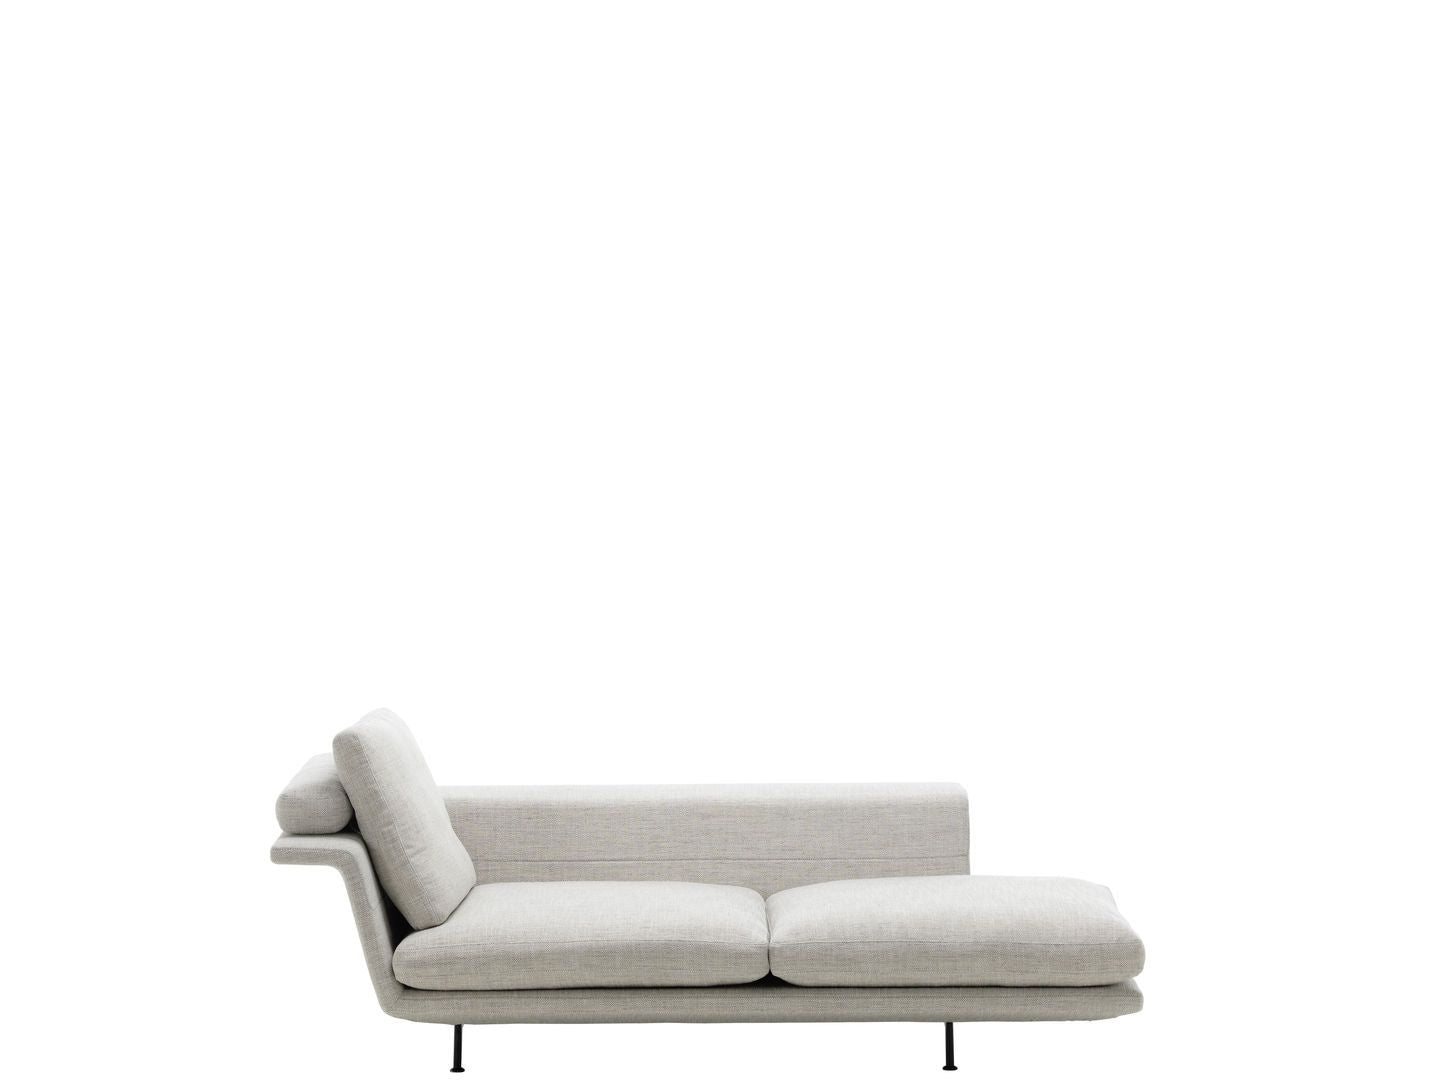 Vitra Grand Sofa Chaise Longue - Luxurious and Comfortable Seating for Your Home